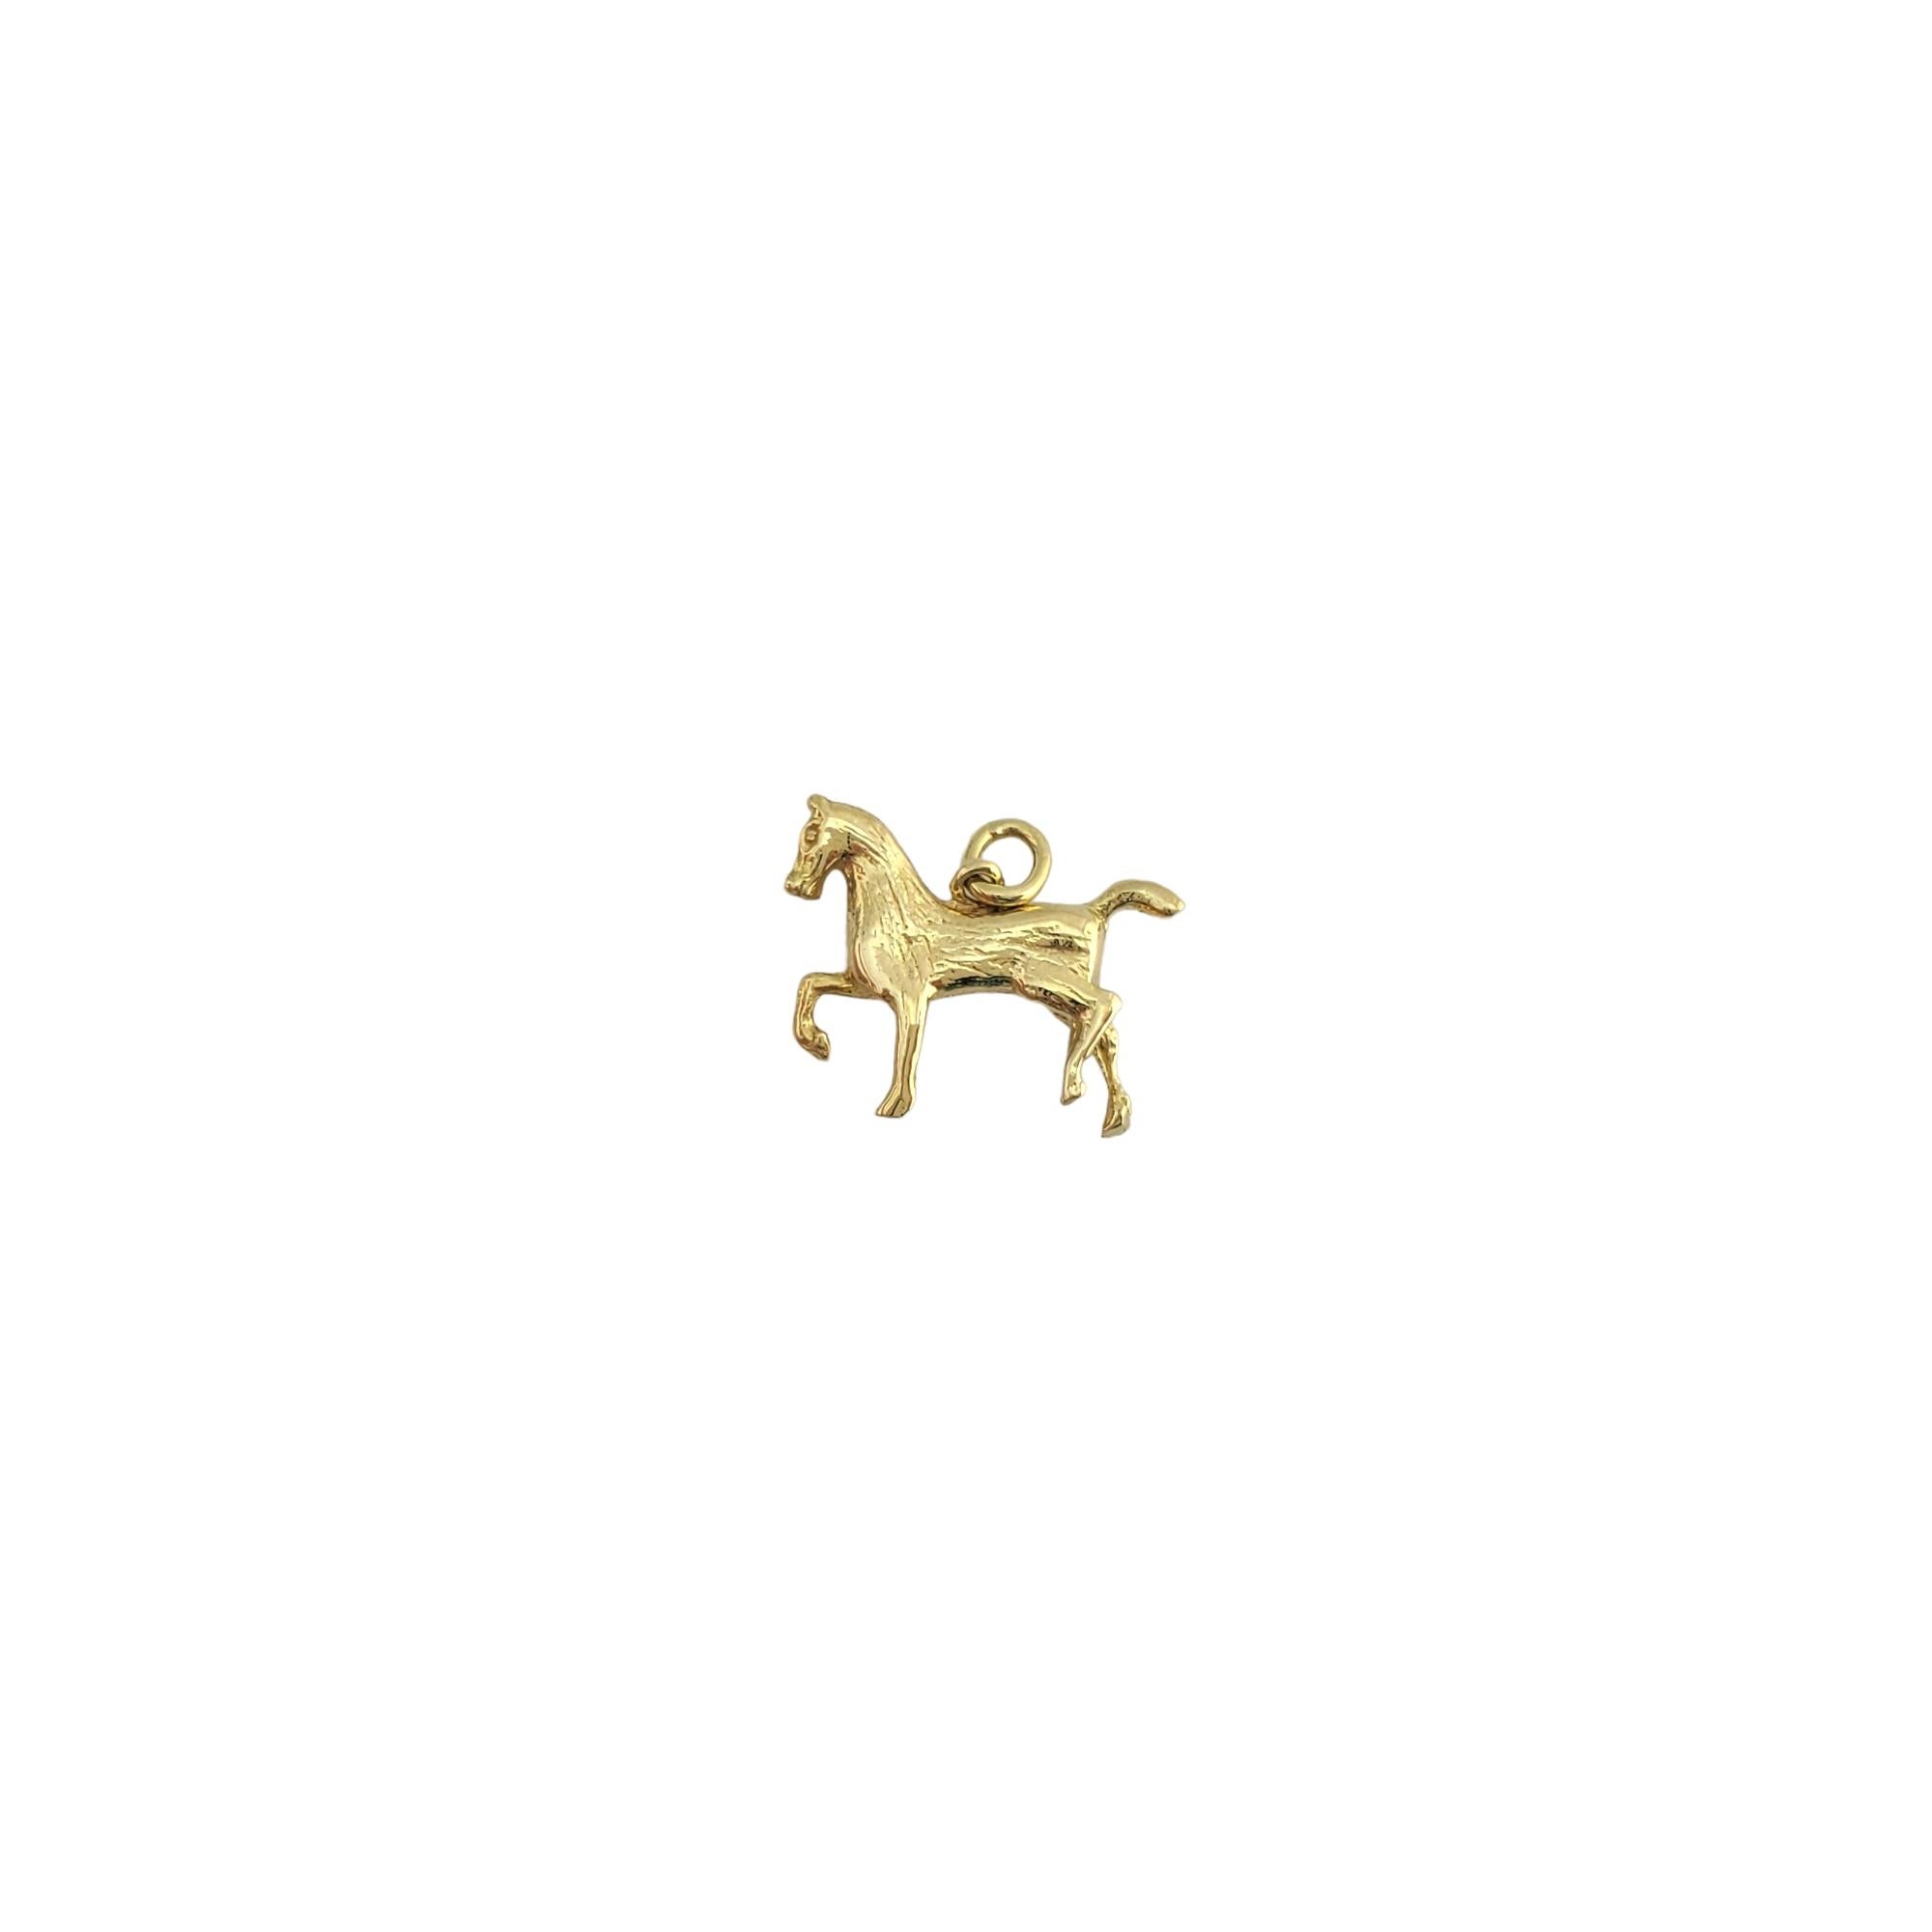 Vintage 18K Yellow Gold Horse

Beautiful 18K gold horse in a trot.

Size: 20mm X 11.92mm

Weight:  3.7g / 2.3dwt

Very good condition, professionally polished.

Will come packaged in a gift box and will be shipped U.S. Priority Mail